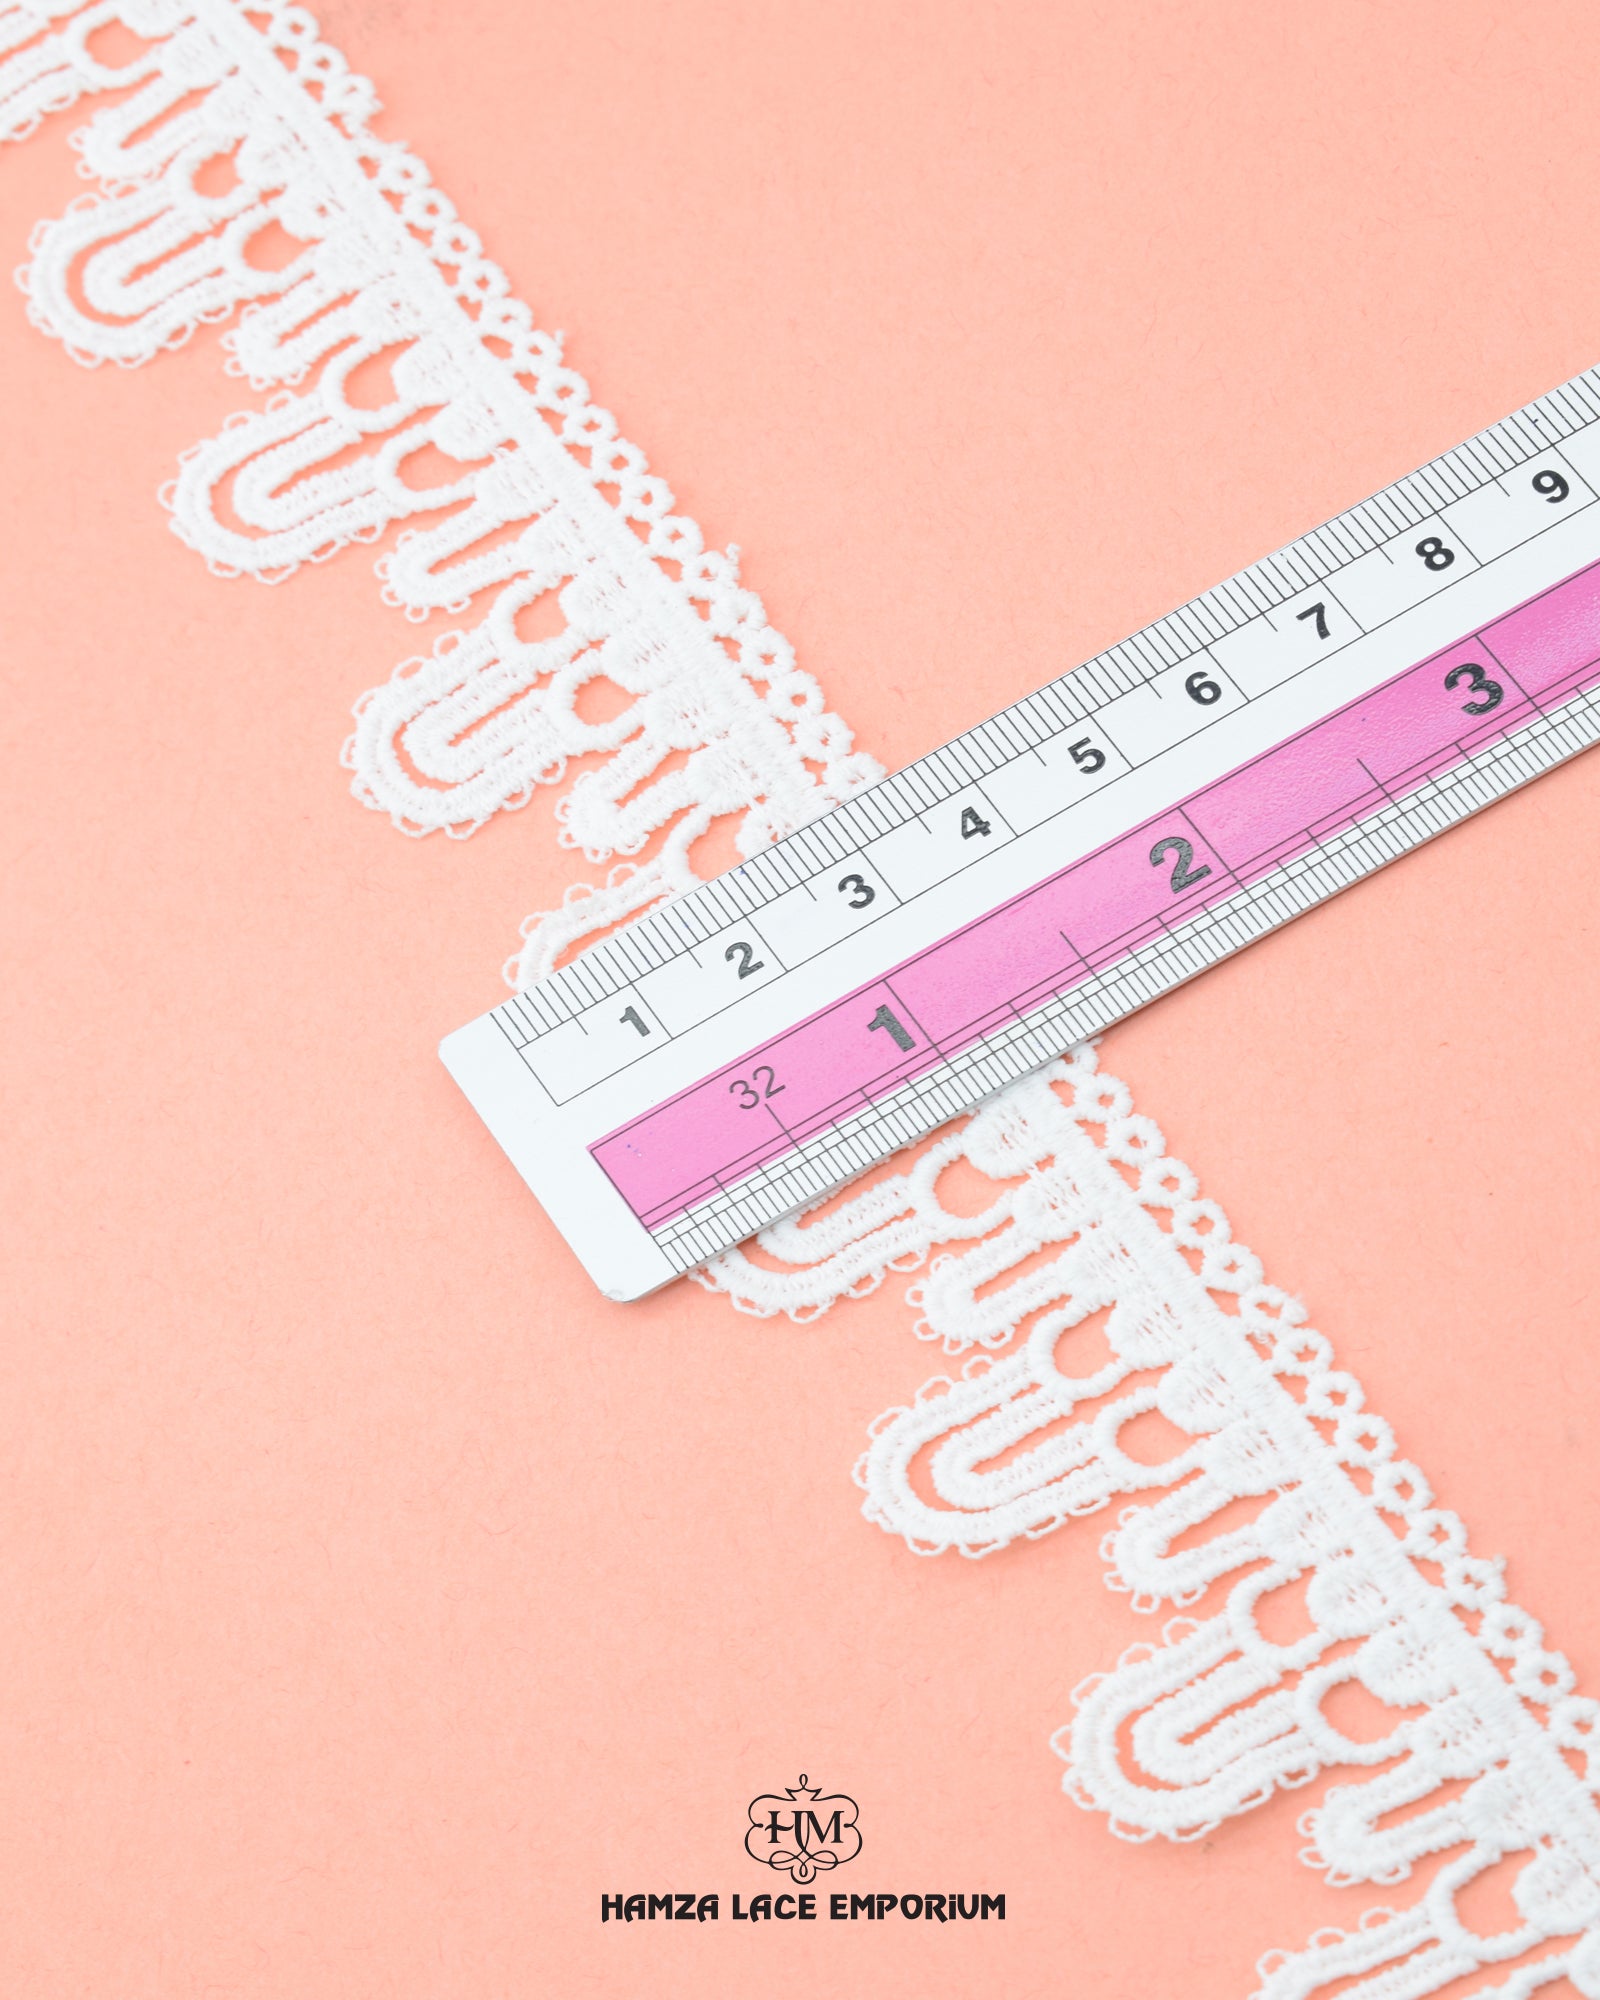 Size of the 'Edging Lace 6252' is shown as '1.15' inches with the help of a ruler